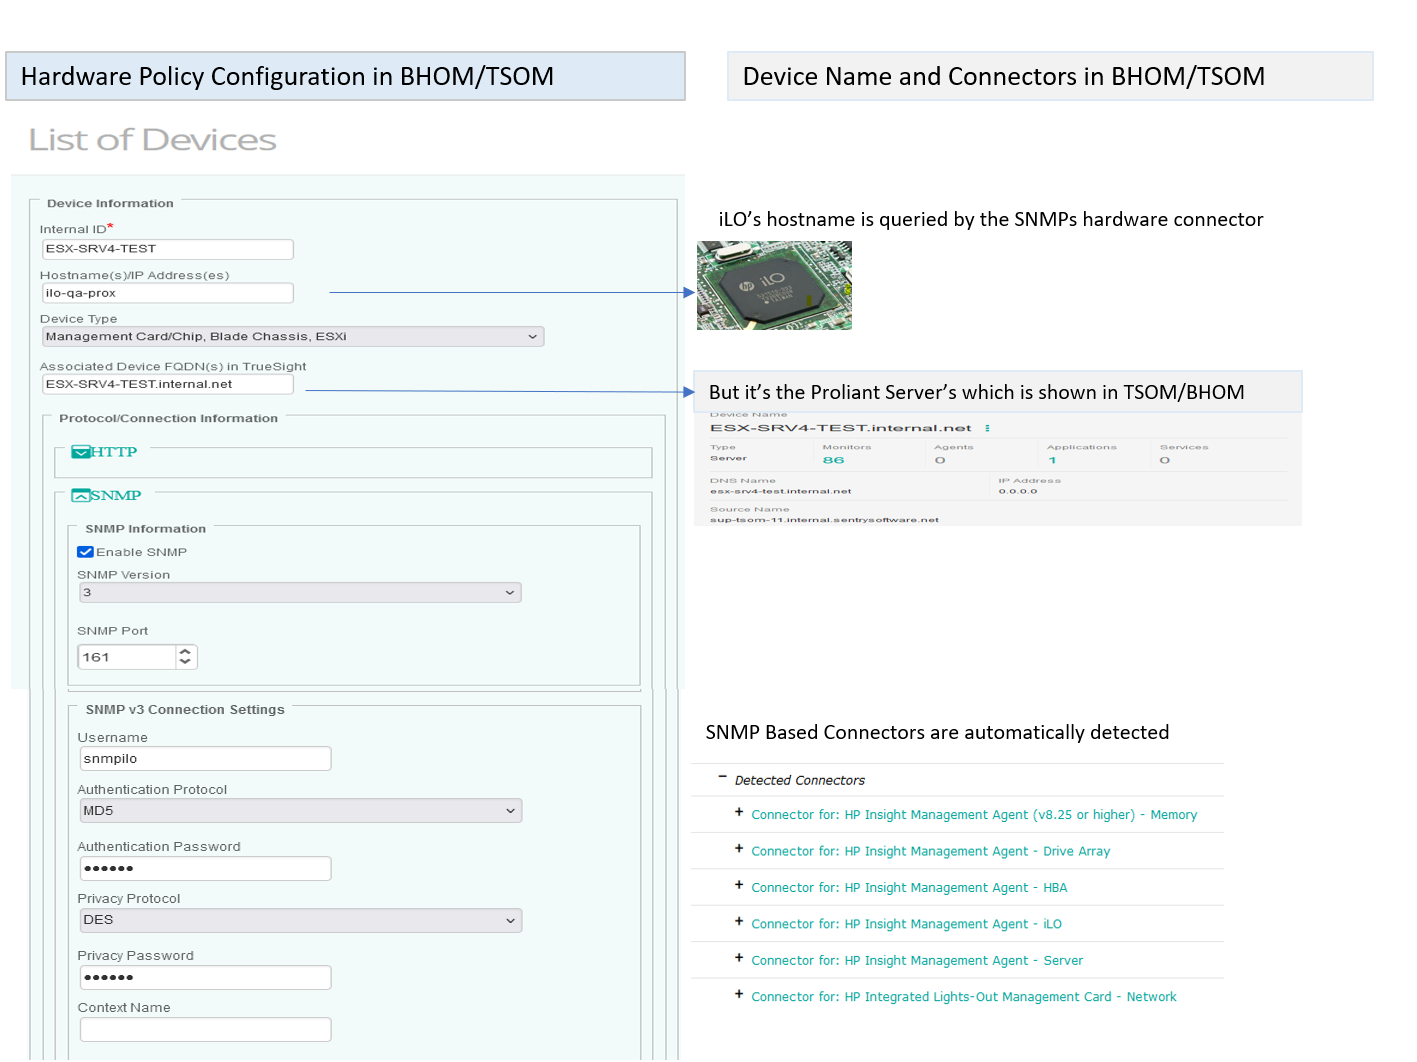 BHOM/TSOM Configuration policy with SNMP 